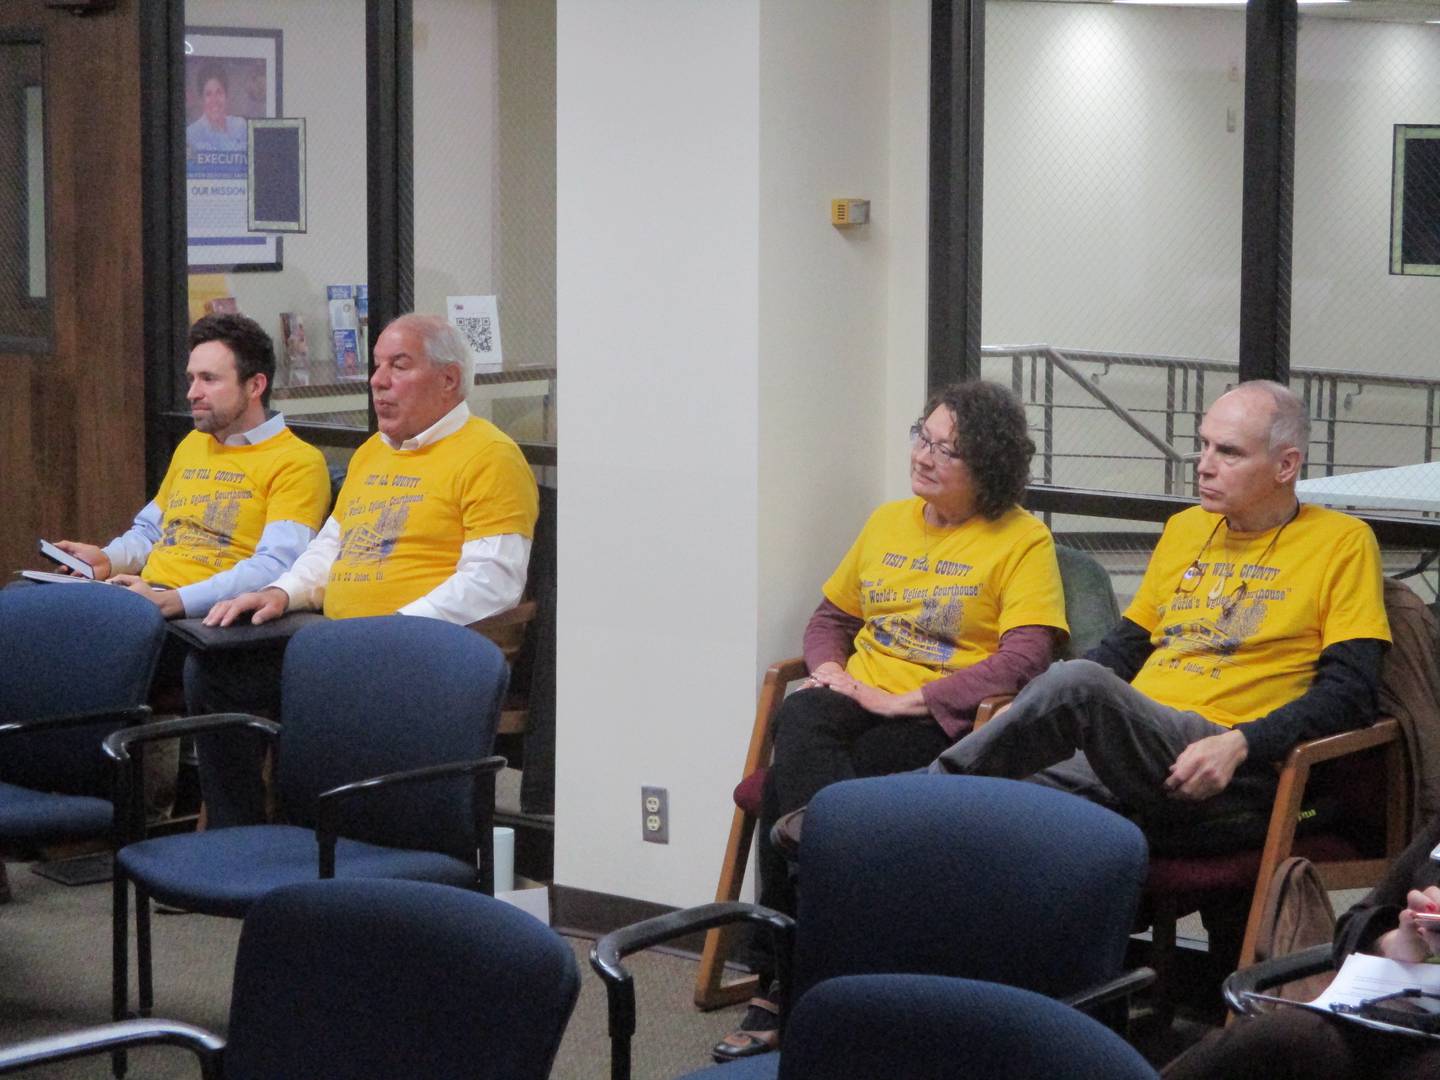 Advocates for preserving the old Will County Courthouse, including (from left) County Courthouse Partnership co-chairs Hudson Hollister and Nick Macris, listen to discussion at the Will County Board meeting on Thursday, March 16, 2023.